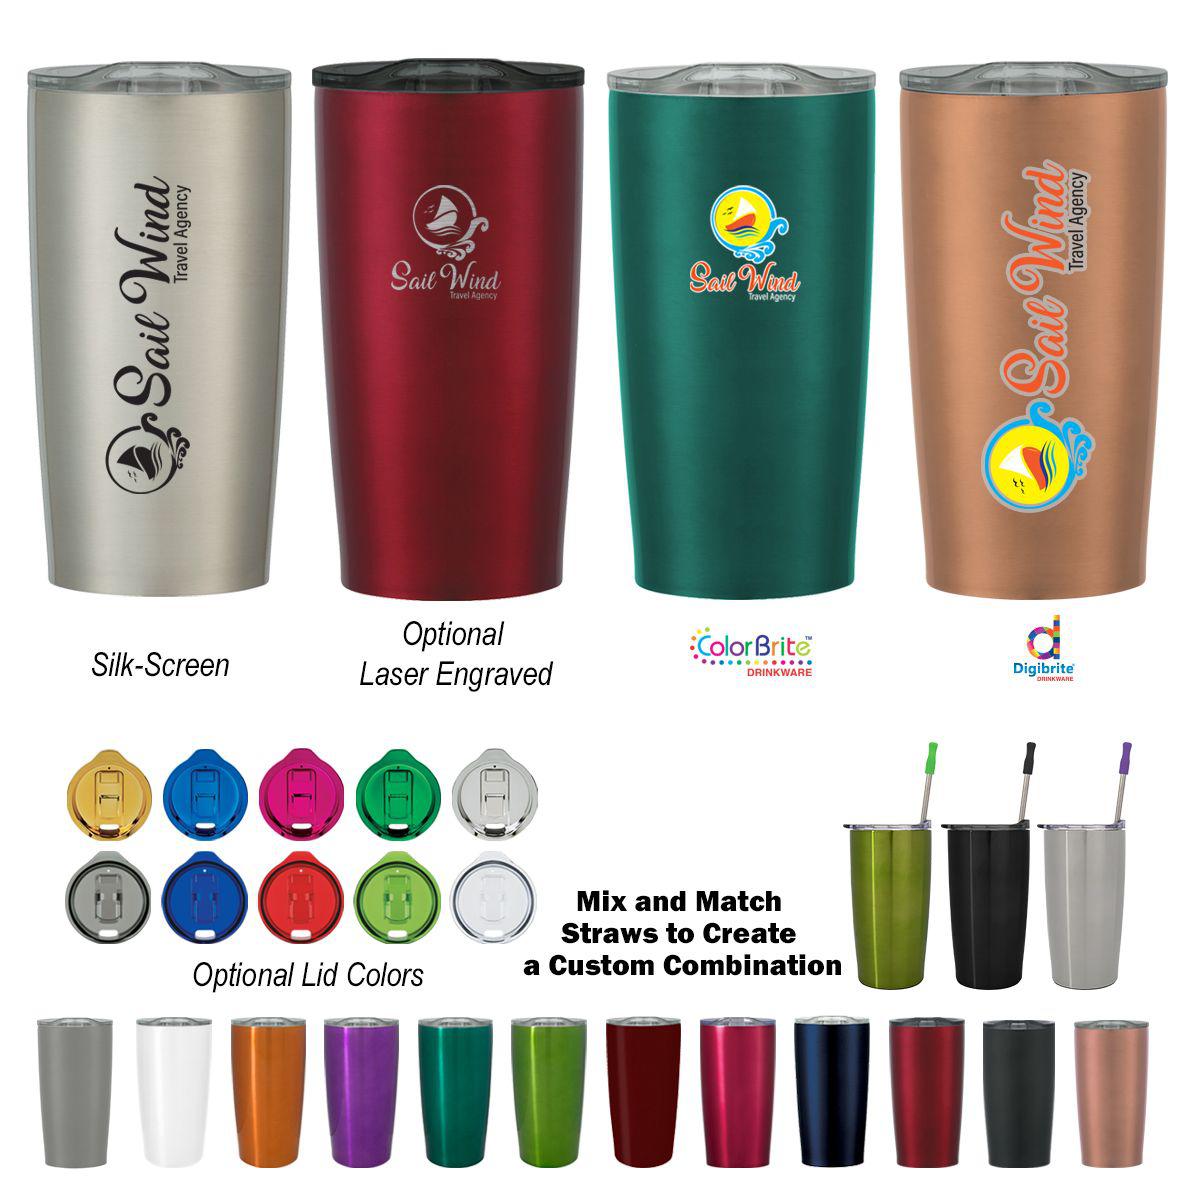 TUMBLERS TO SEE MORE GO TO WWW.CEWADVERTISING.COM